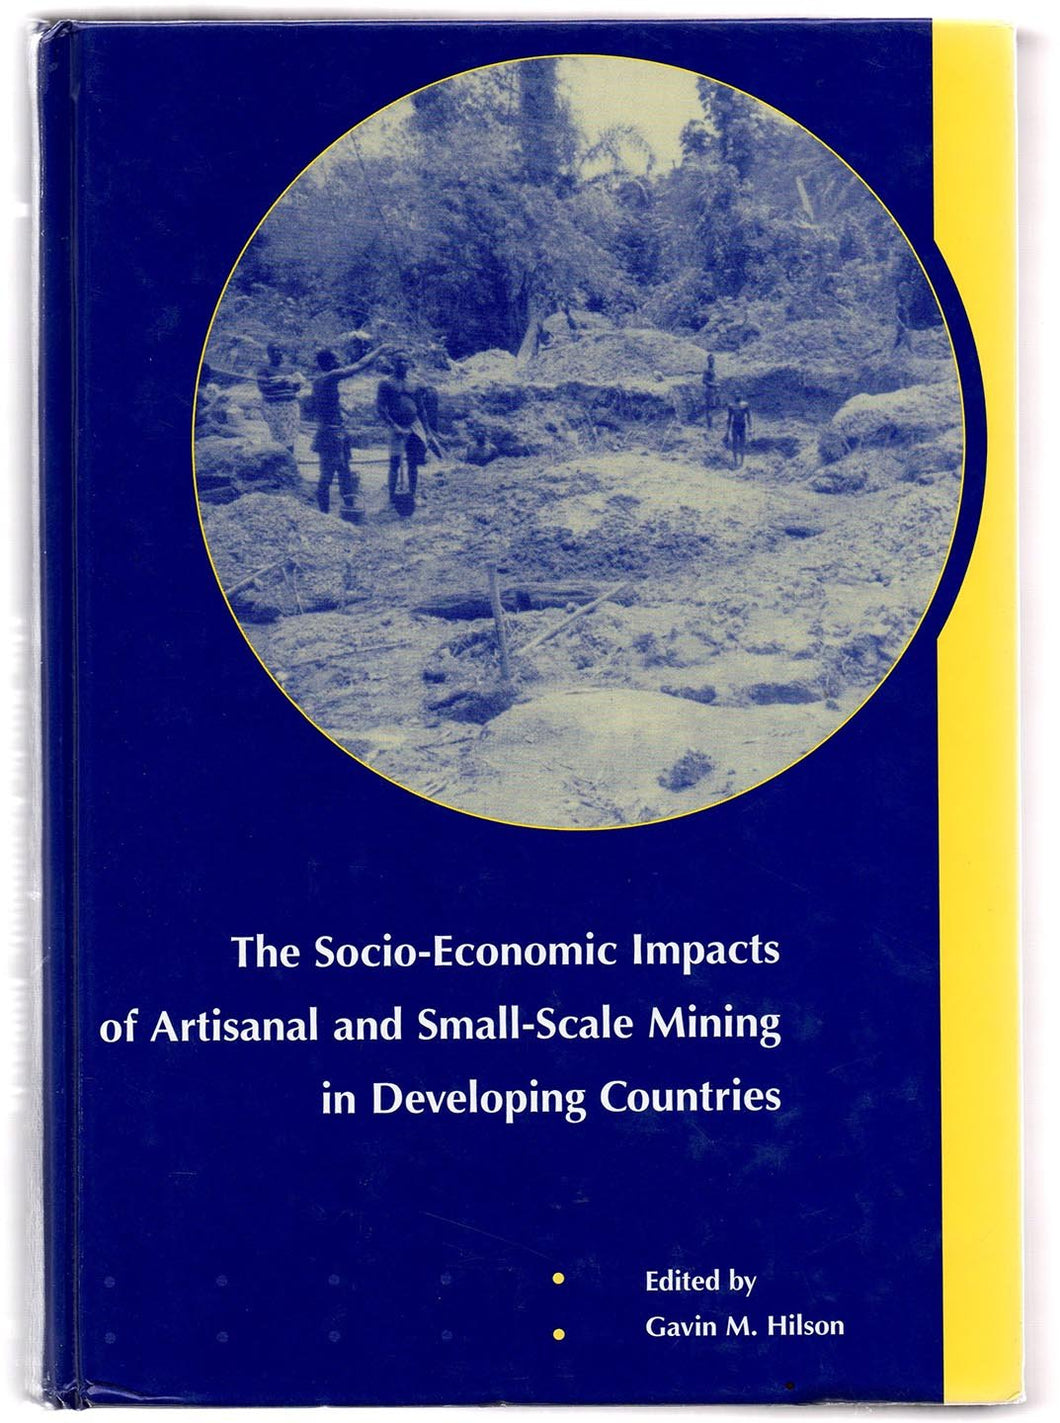 The Socio-Economic Impacts of Artisanal and Small-Scale Mining in Developing Countries